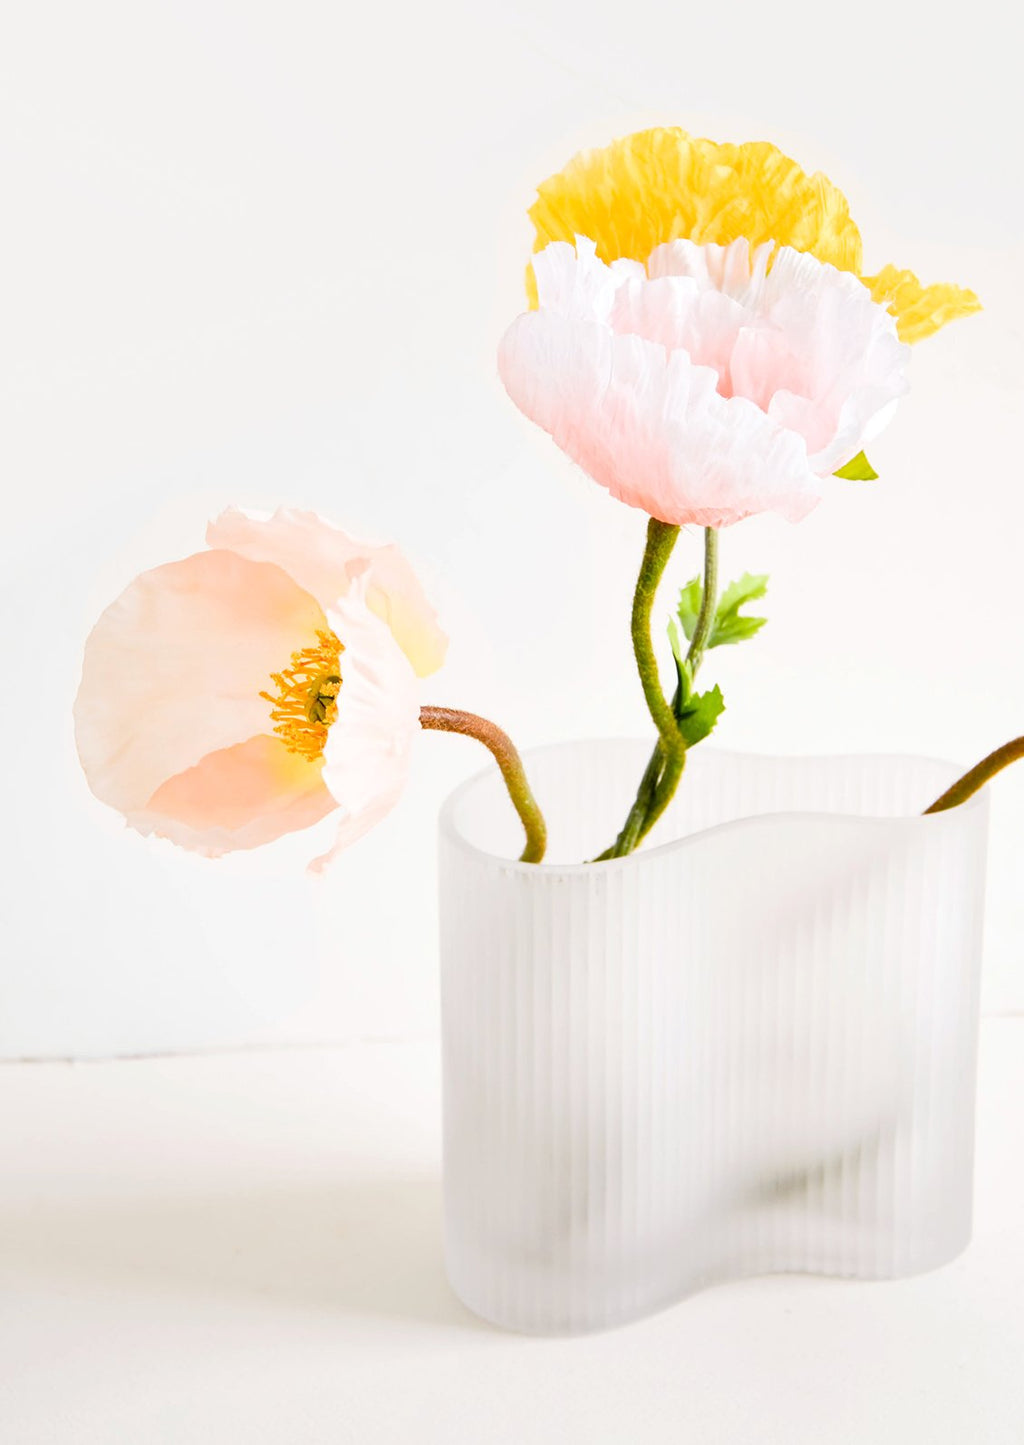 1: Frosted glass vase in asymmetric shape, housing multicolor poppies